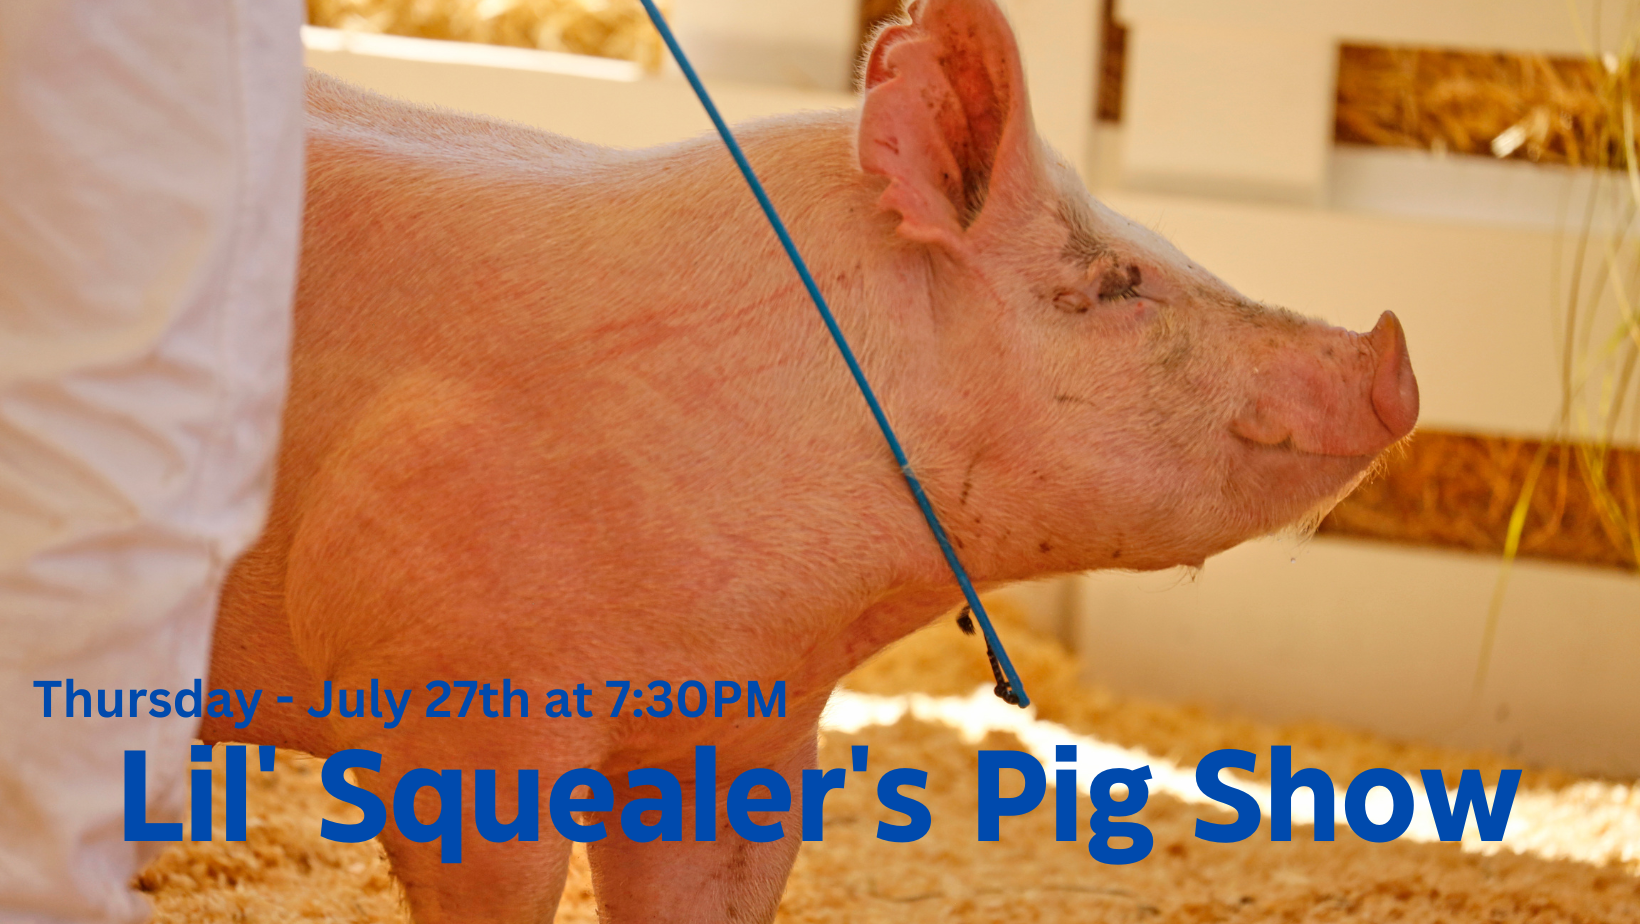 Lil' Squealer's Pig Show